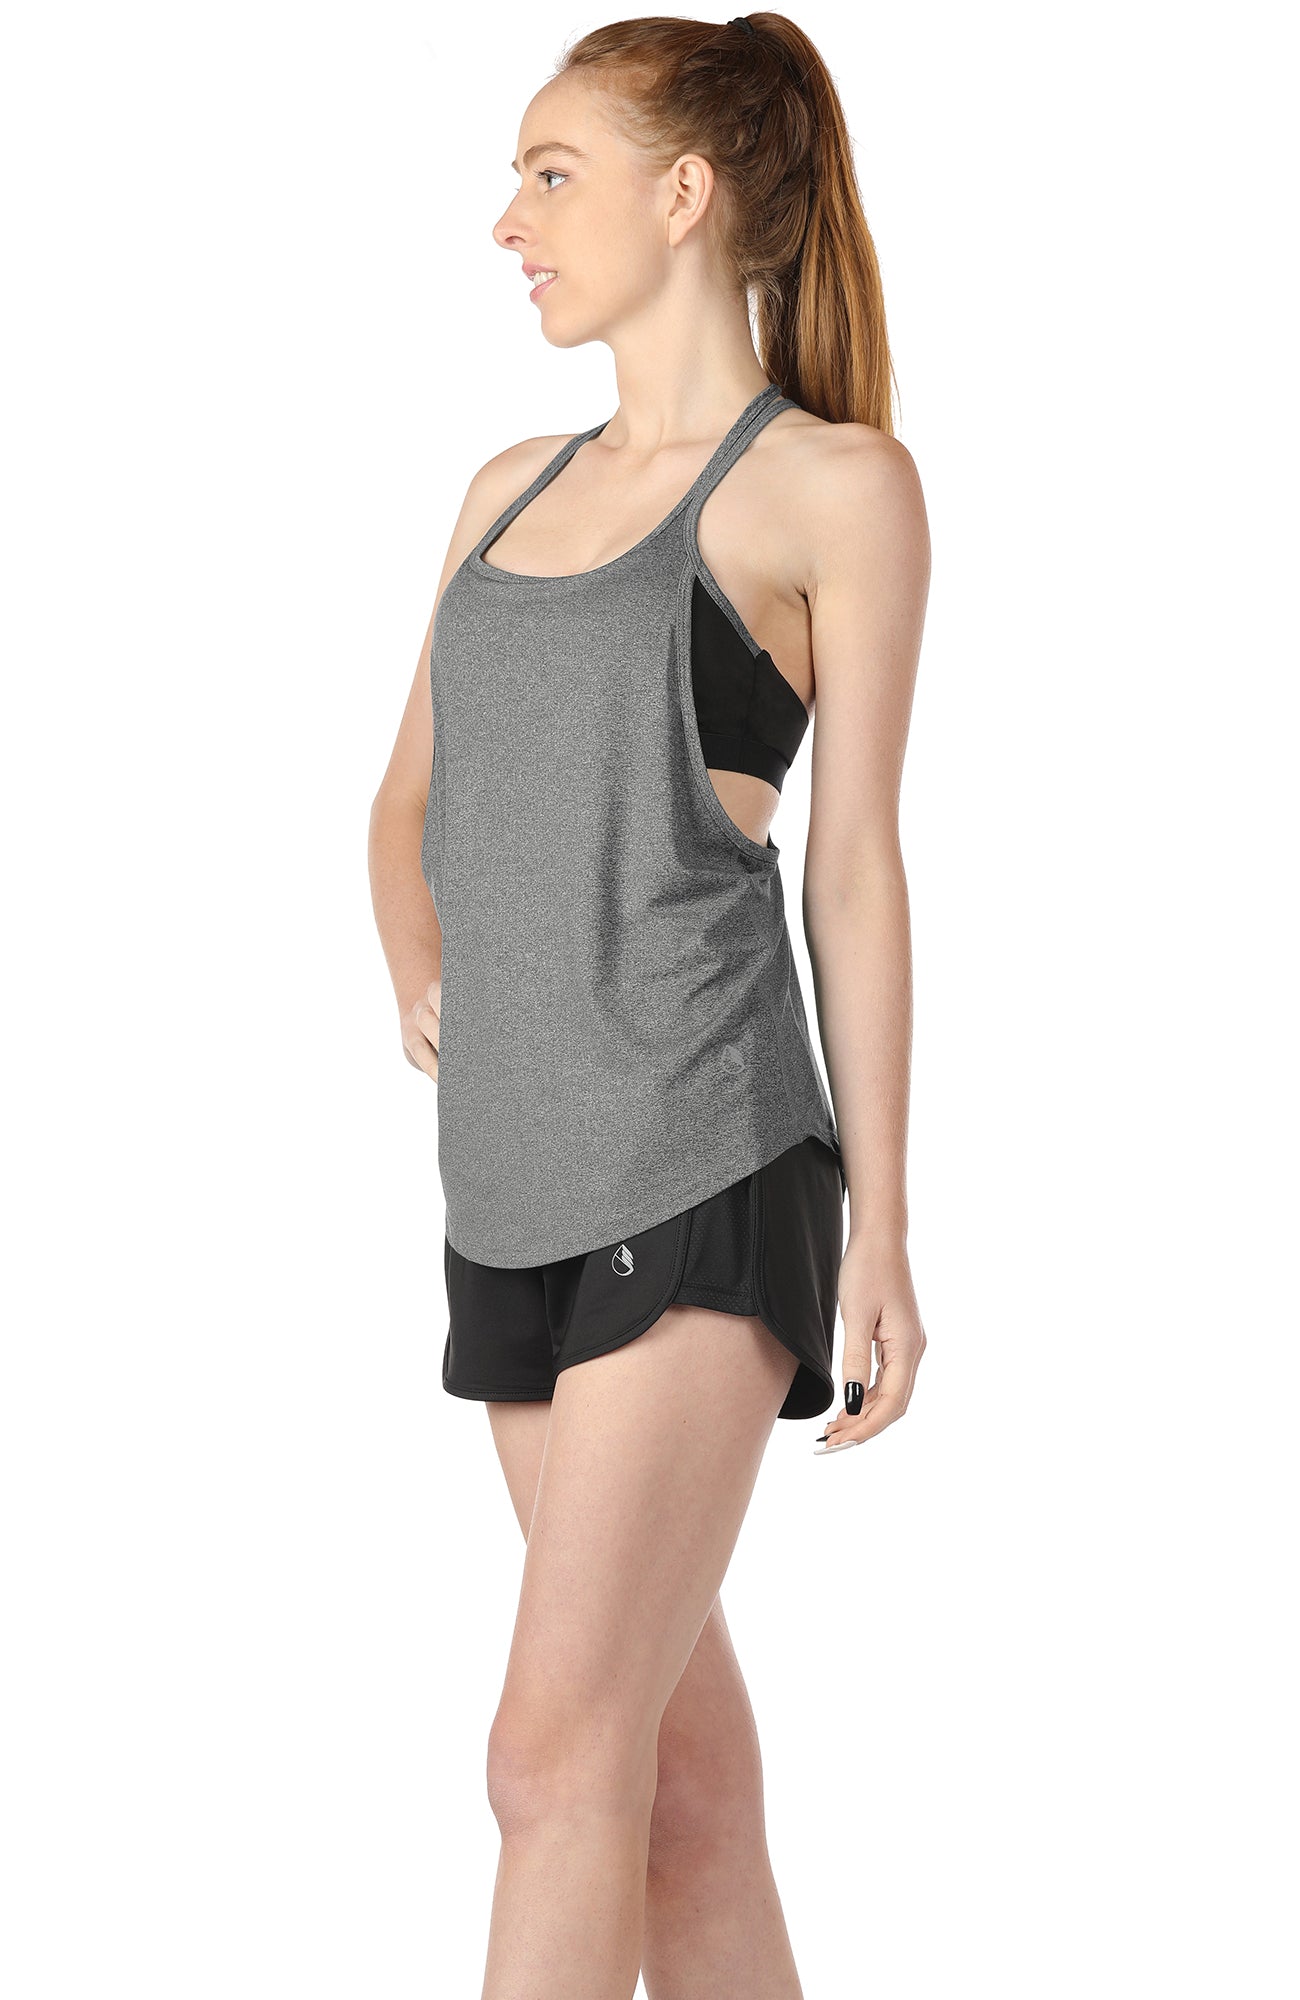 icyzone Women's Yoga Tank Top Built in Bra - Strappy Sports Vest Exercise  Gym Shirts Workout Tops (M - ShopStyle